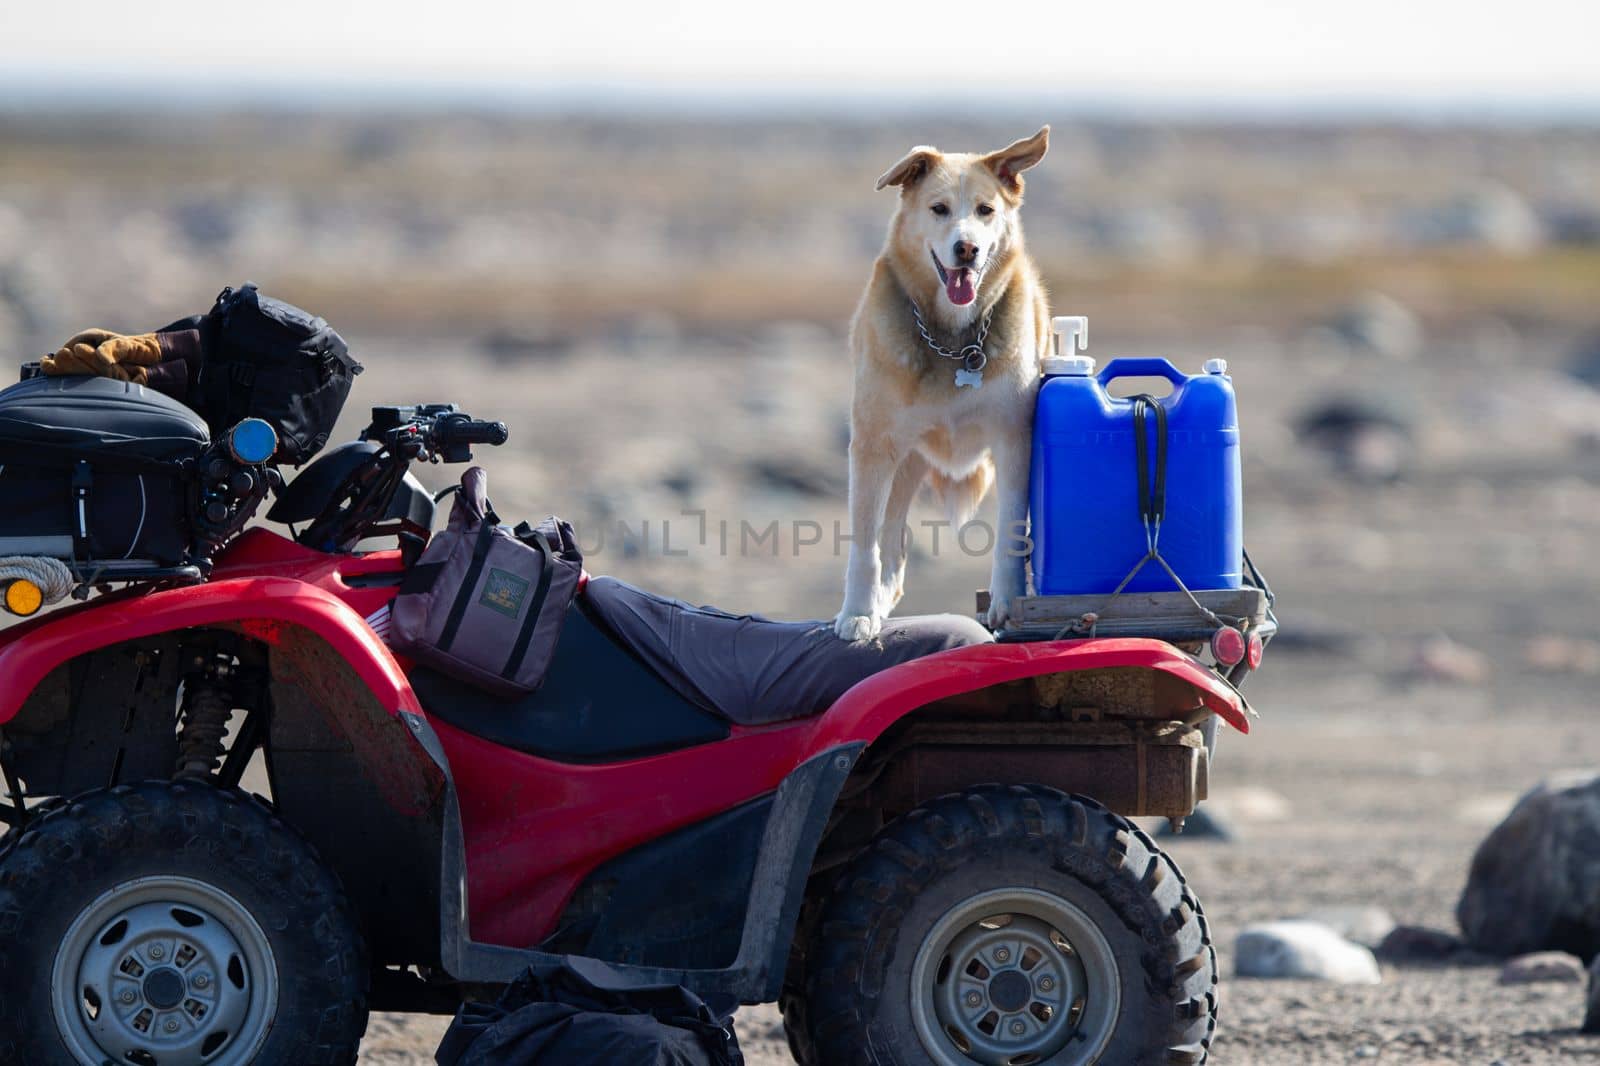 A yellow Labrador dog stands on an all-terrain vehicle ready to go riding by Granchinho